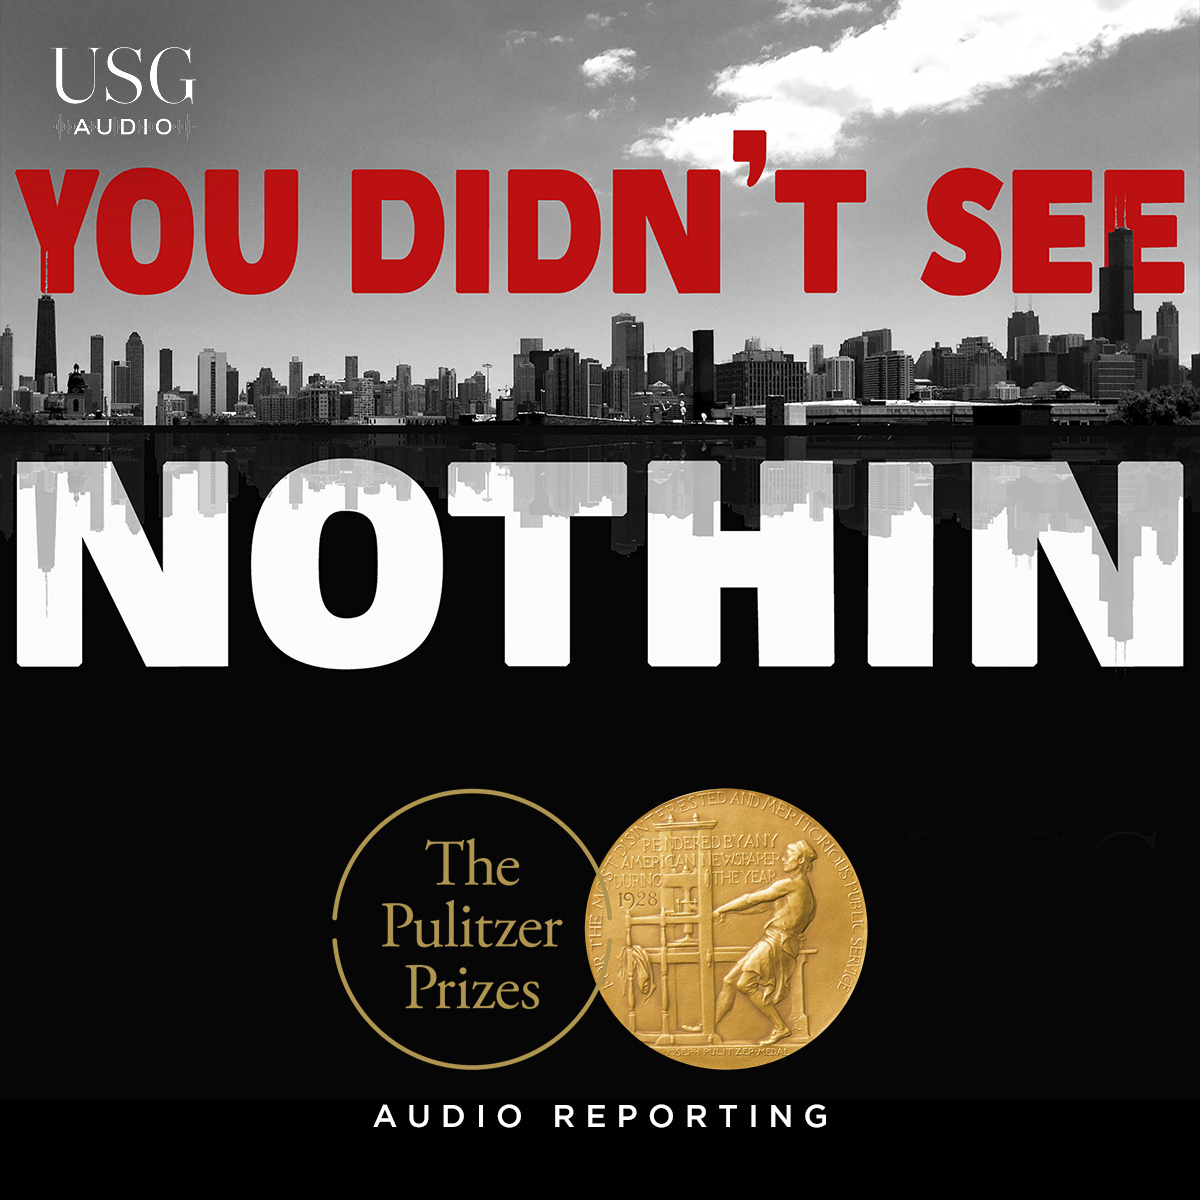 Congrats to Yohance Lacour, Invisible Institute & USG Audio's You Didn’t See Nothin on their 2024 Pulitzer Prize win! The Pulitzer Prize is recognized as the most prestigious award in their field in the US, honoring American achievements in journalism, letters, drama, and music.